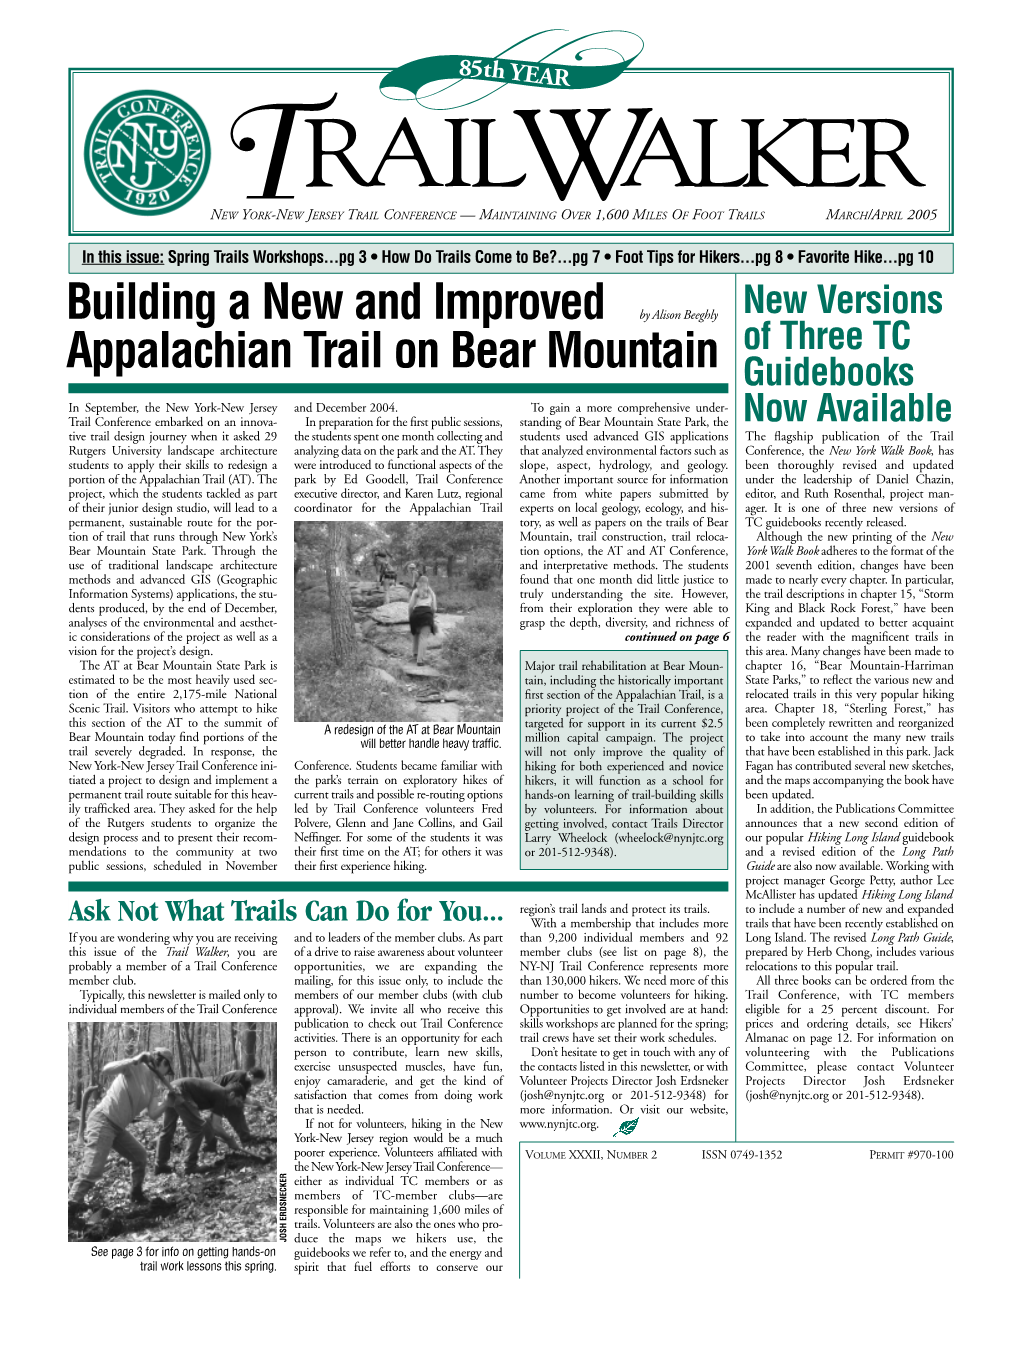 Building a New and Improved Appalachian Trail on Bear Mountain